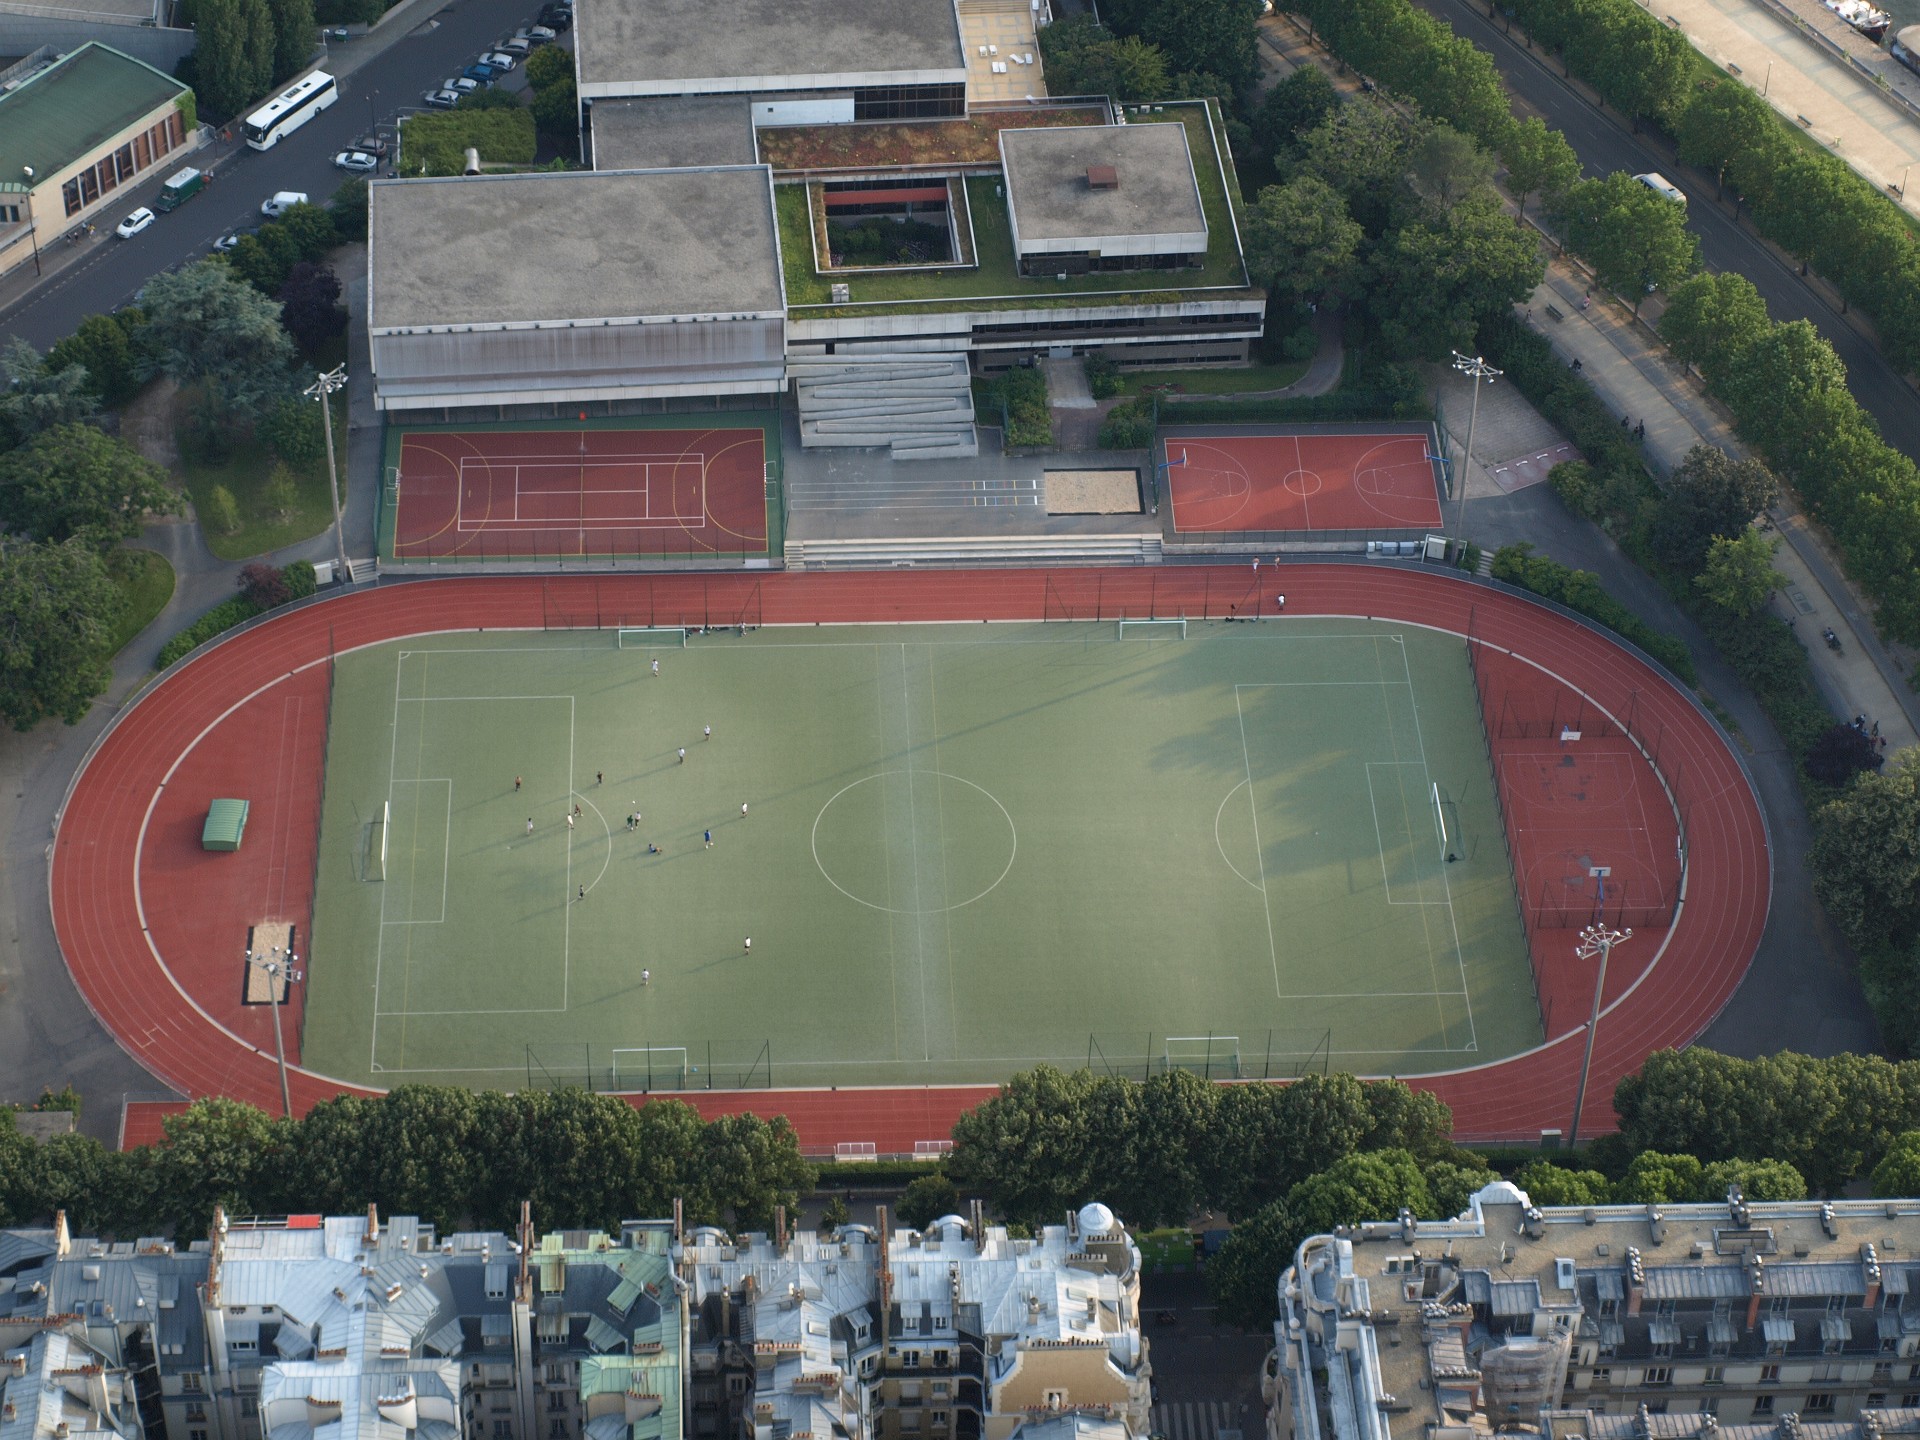 Soccer Field From the Top of the Tower